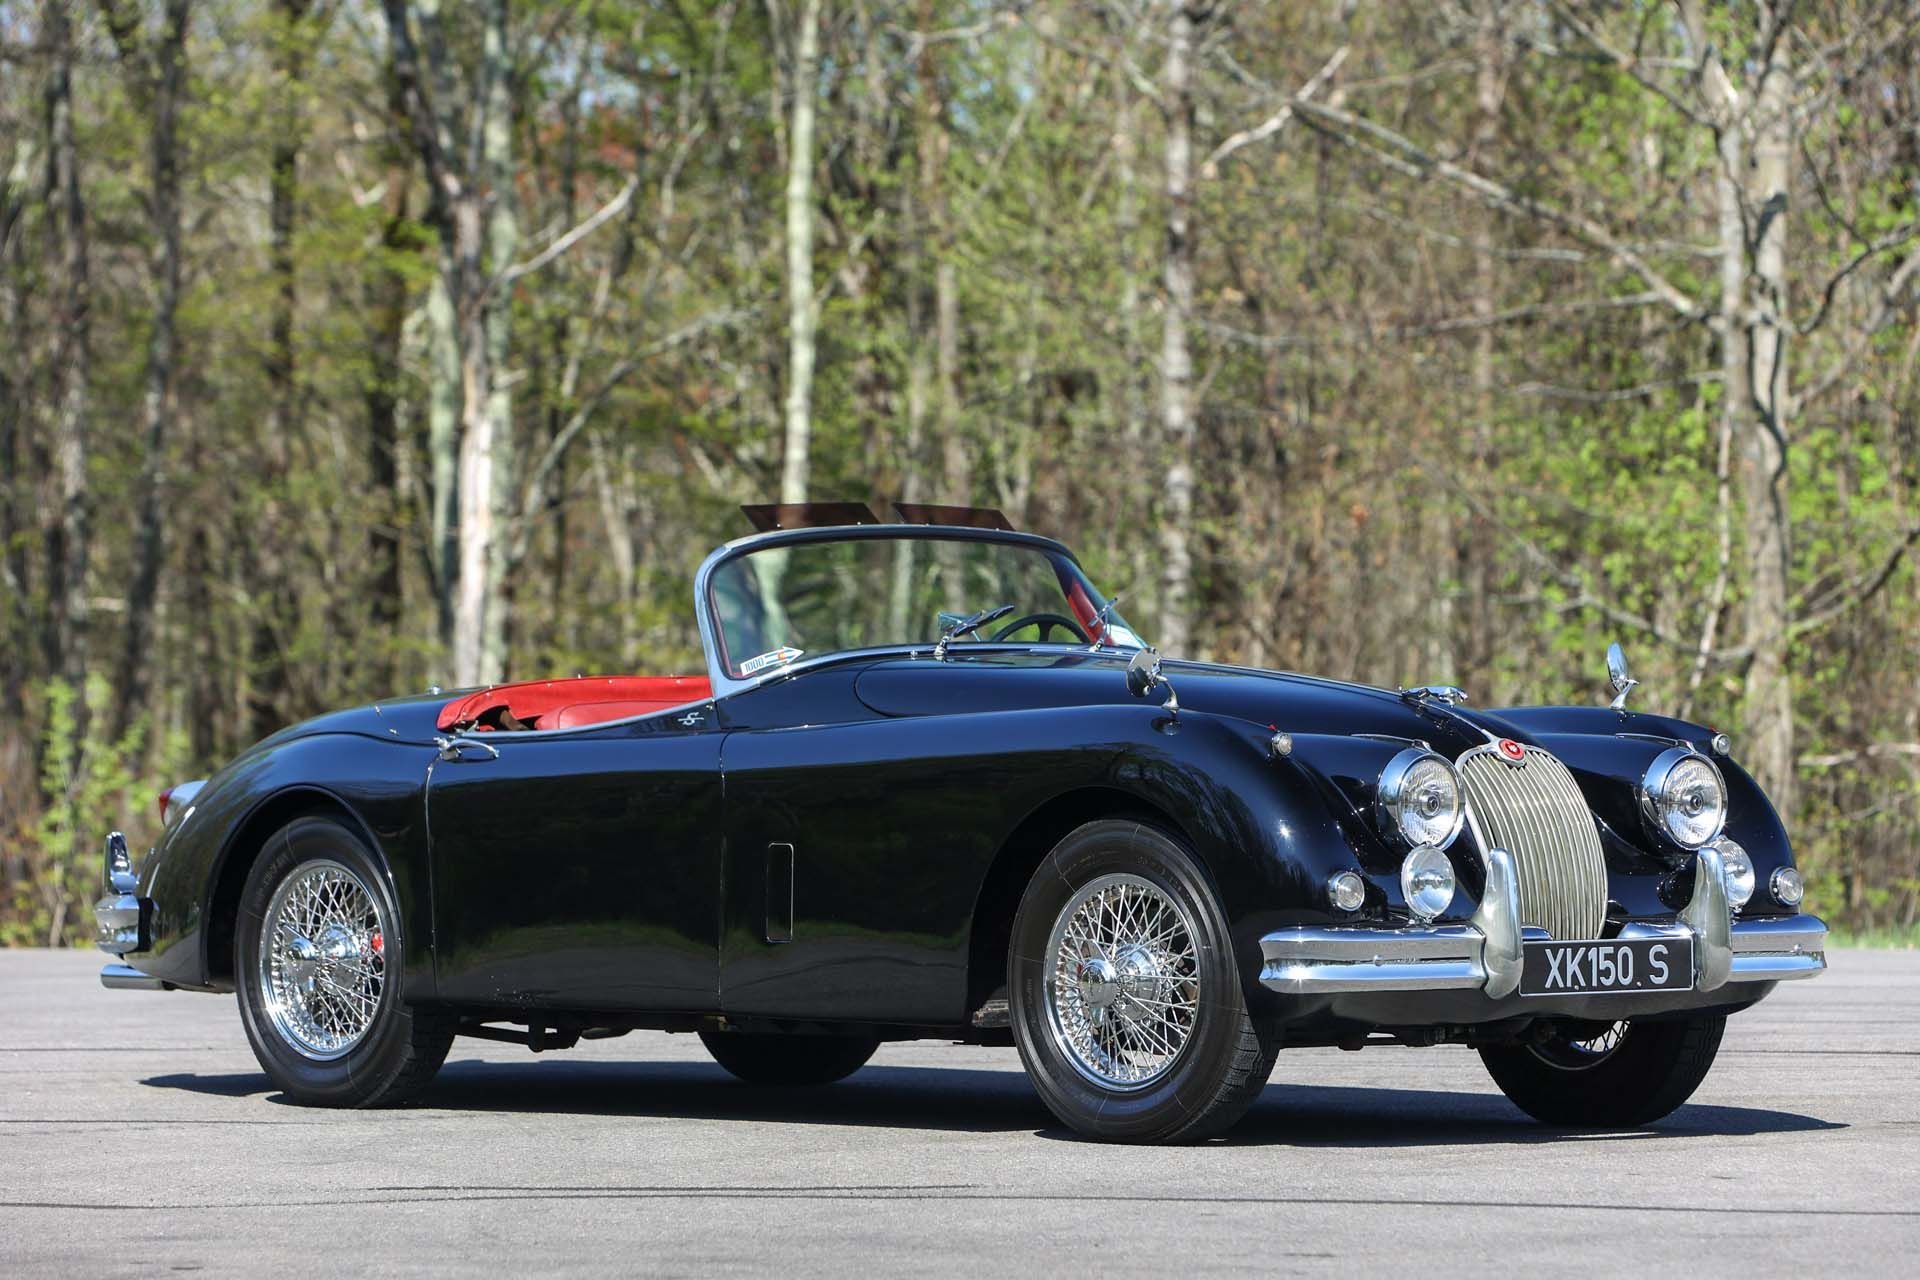 1958 Jaguar XK 150 S 3.4 Roadster | Passion for the Drive: The Cars of Jim  Taylor | Collector Car Auctions | Broad Arrow Auctions